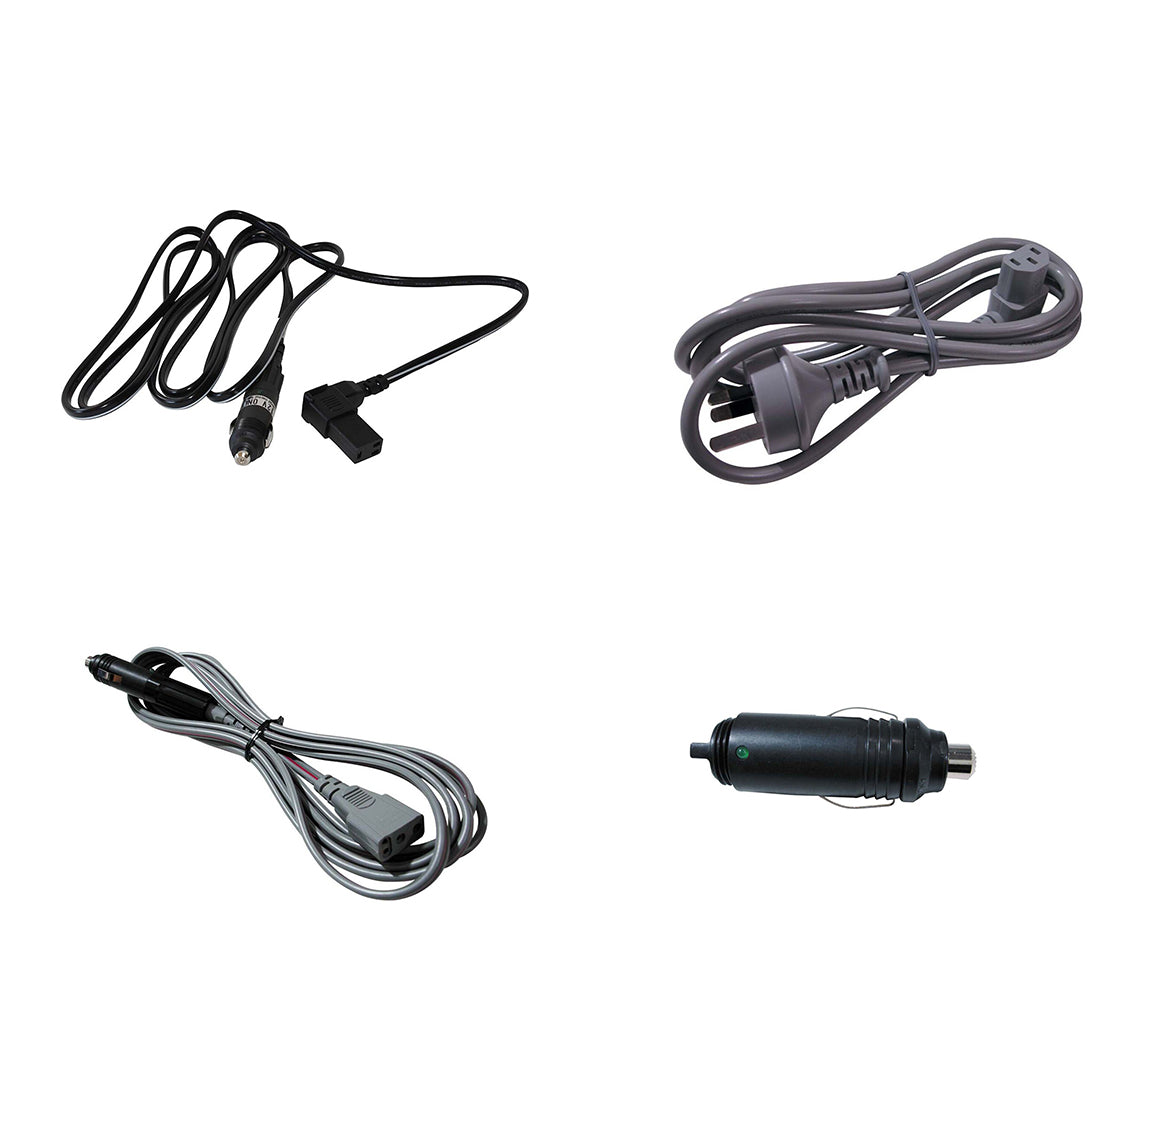 Engel Replacement Cords & Plugs